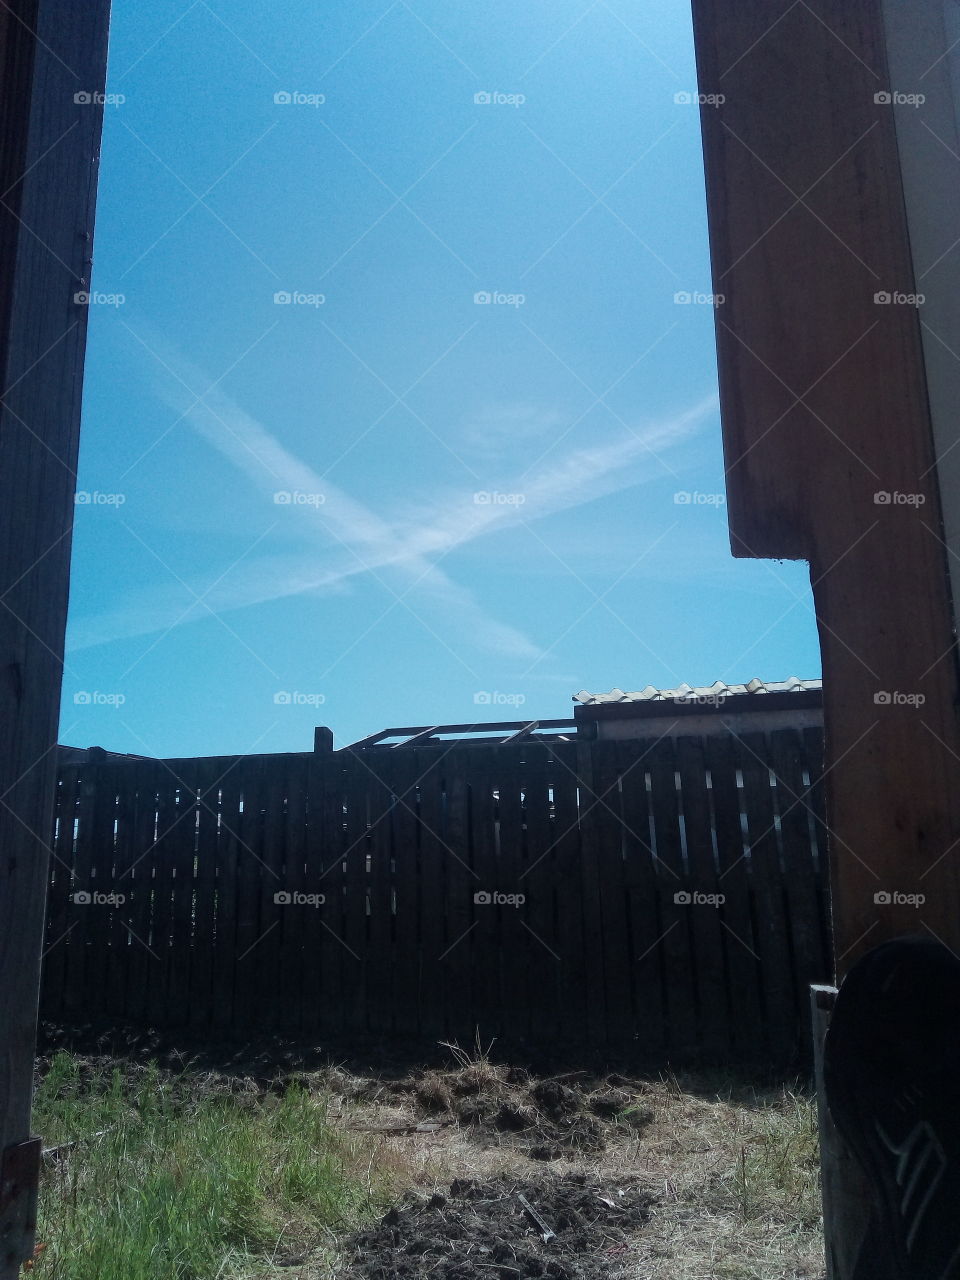 x marks the spot